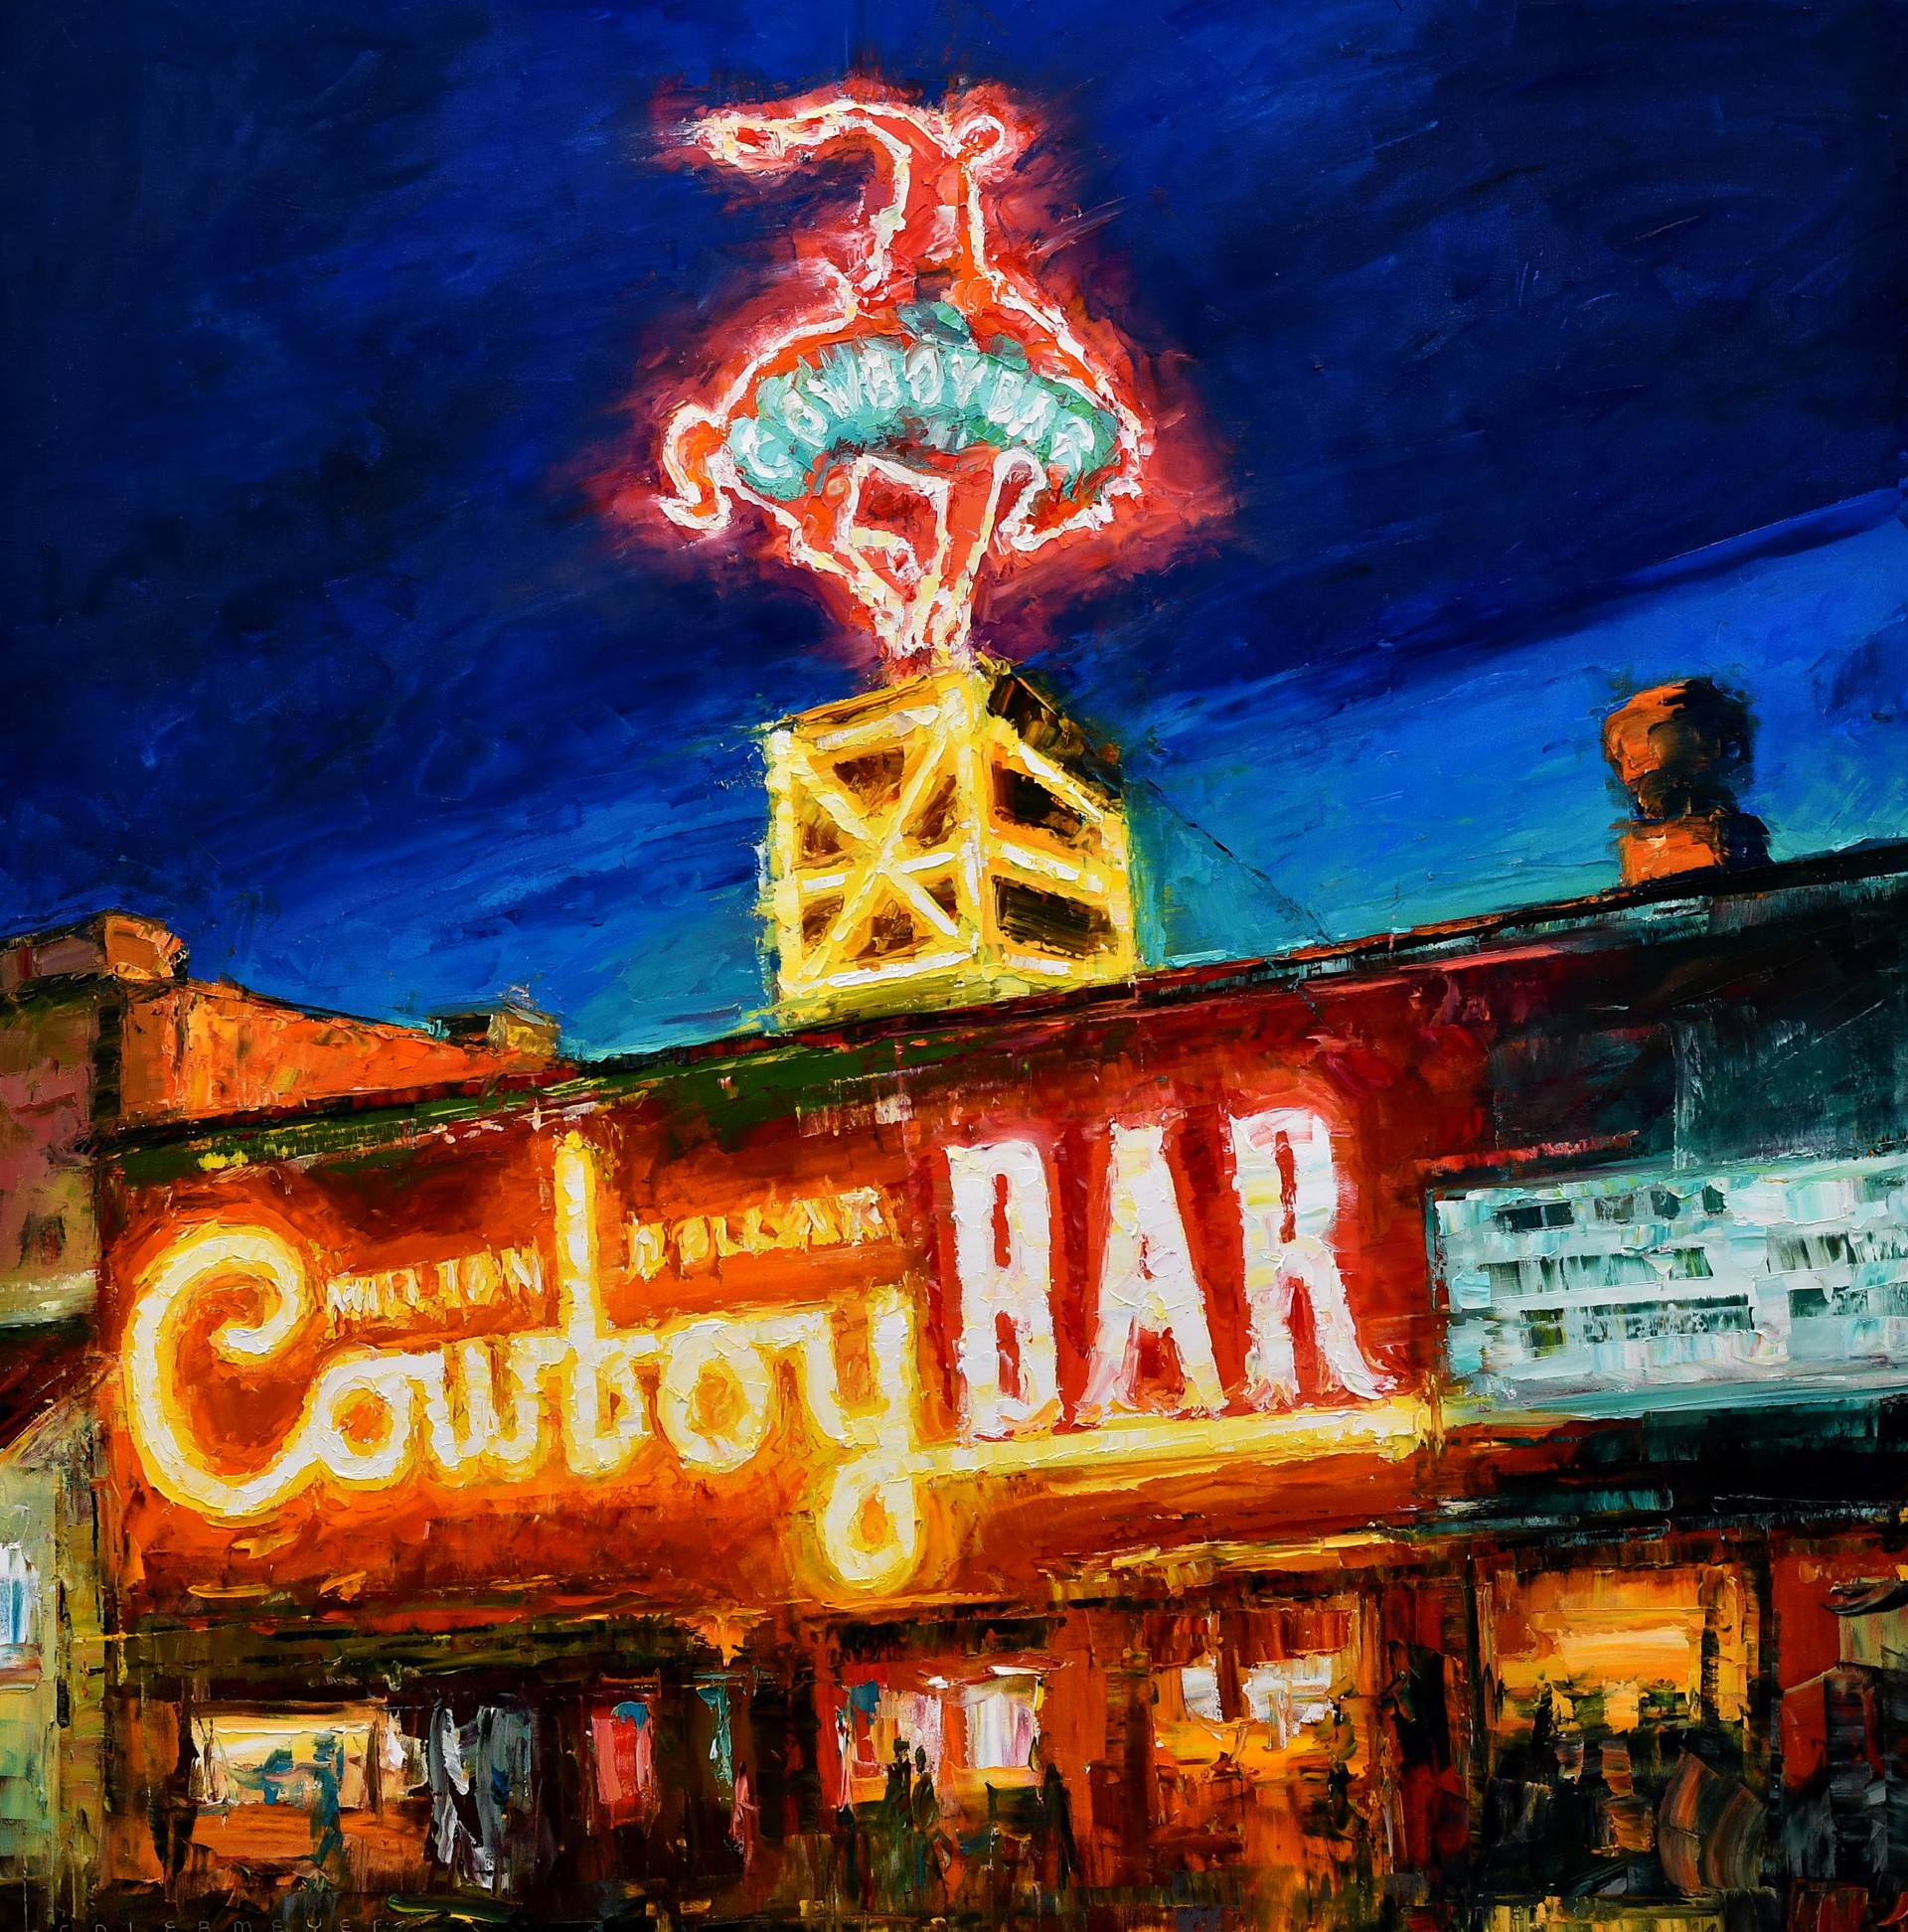 Original Oil Painting Featuring The Million Dollar Cowboy Bar At Night With Neon Lights